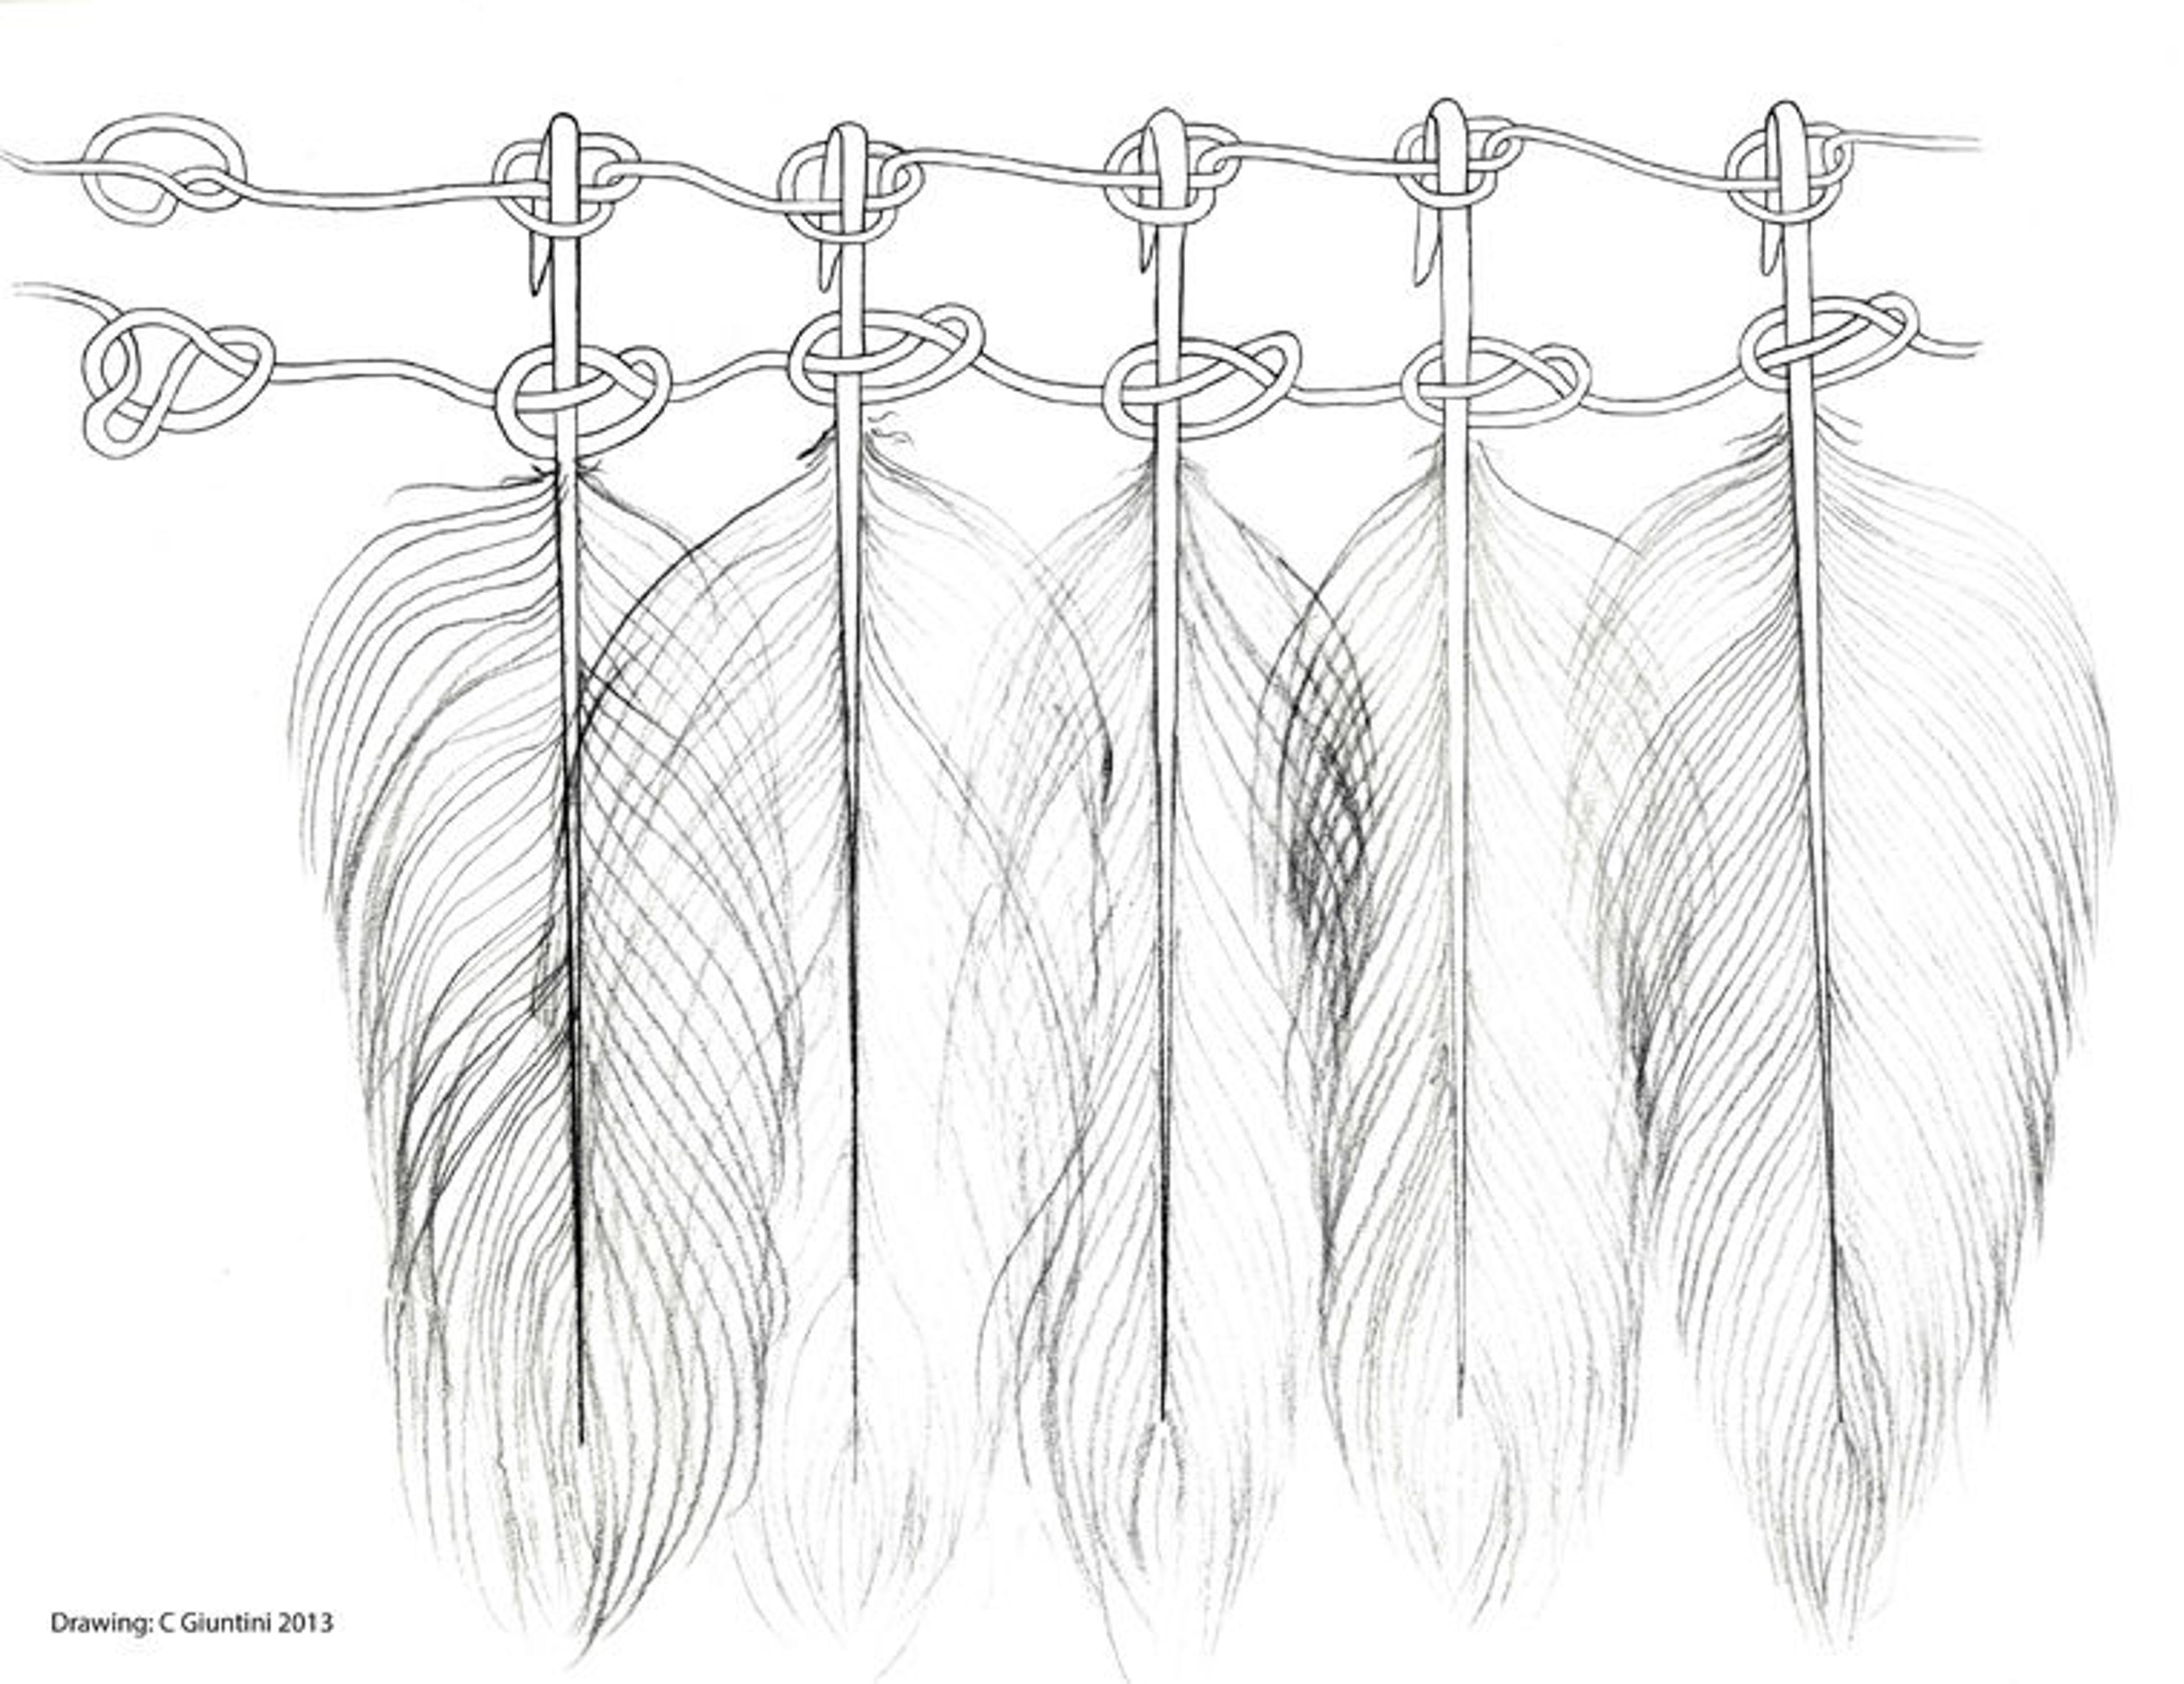 Line drawing of feathers attached to strings via hand-knots